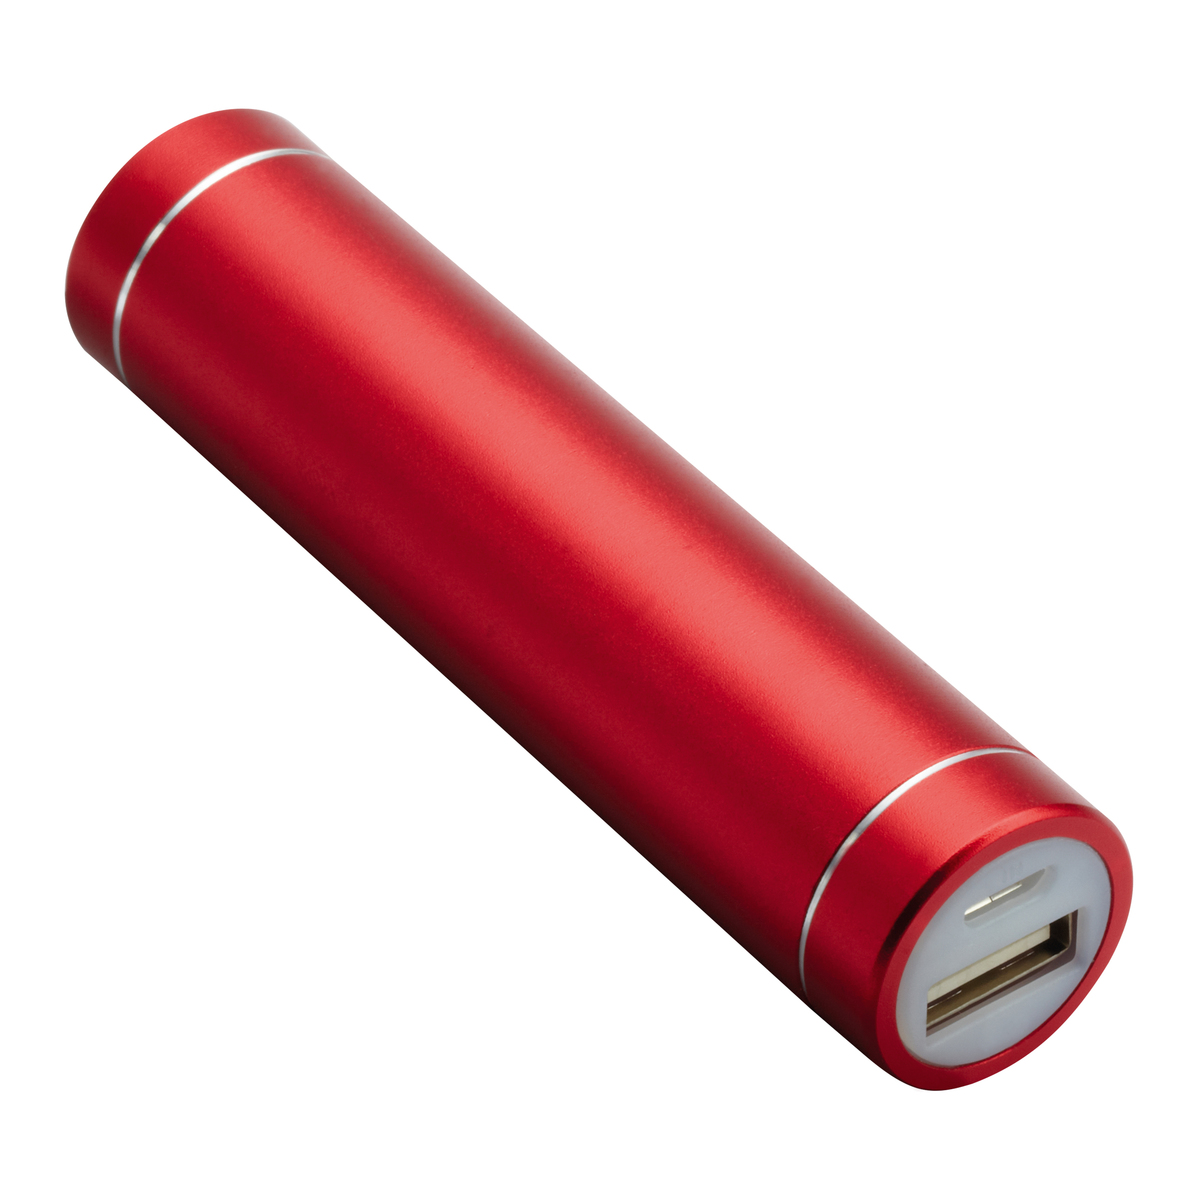 LM Powerbank REFLECTS-DELPHI RED 3000 mAh rot